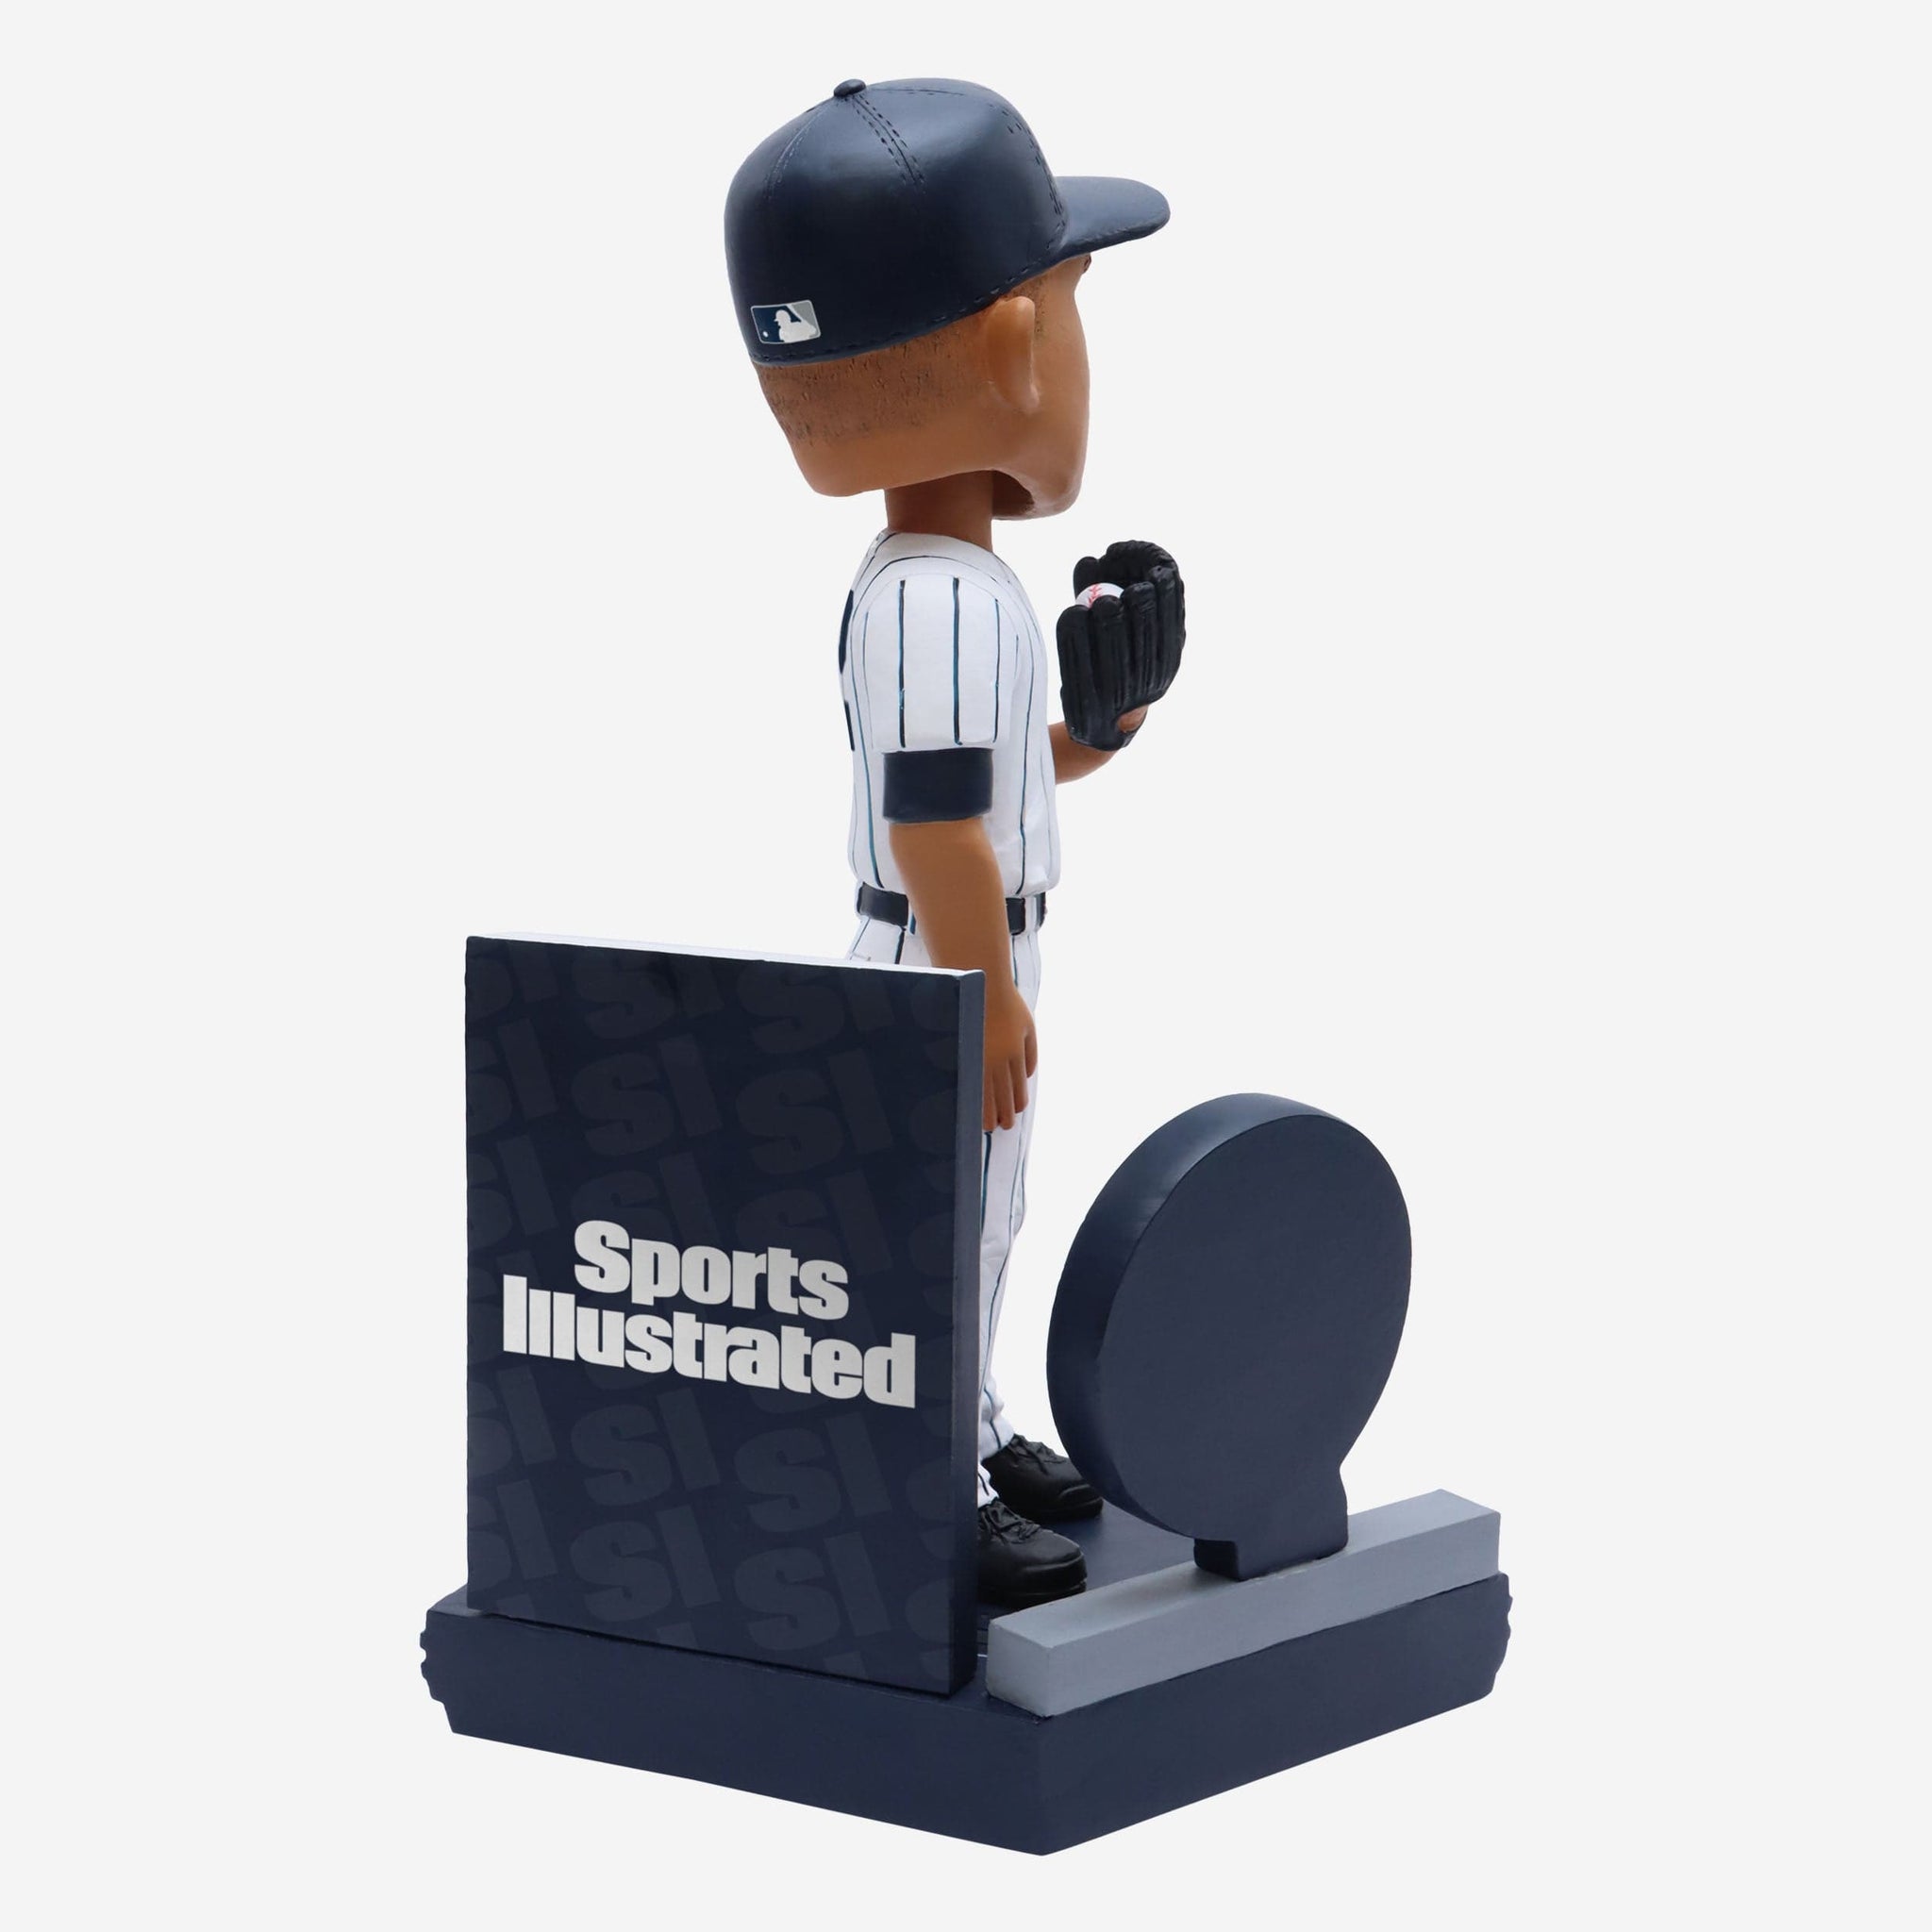 Mariano Rivera New York Yankees Legends of the Park Hall of Fame Bobbl FOCO